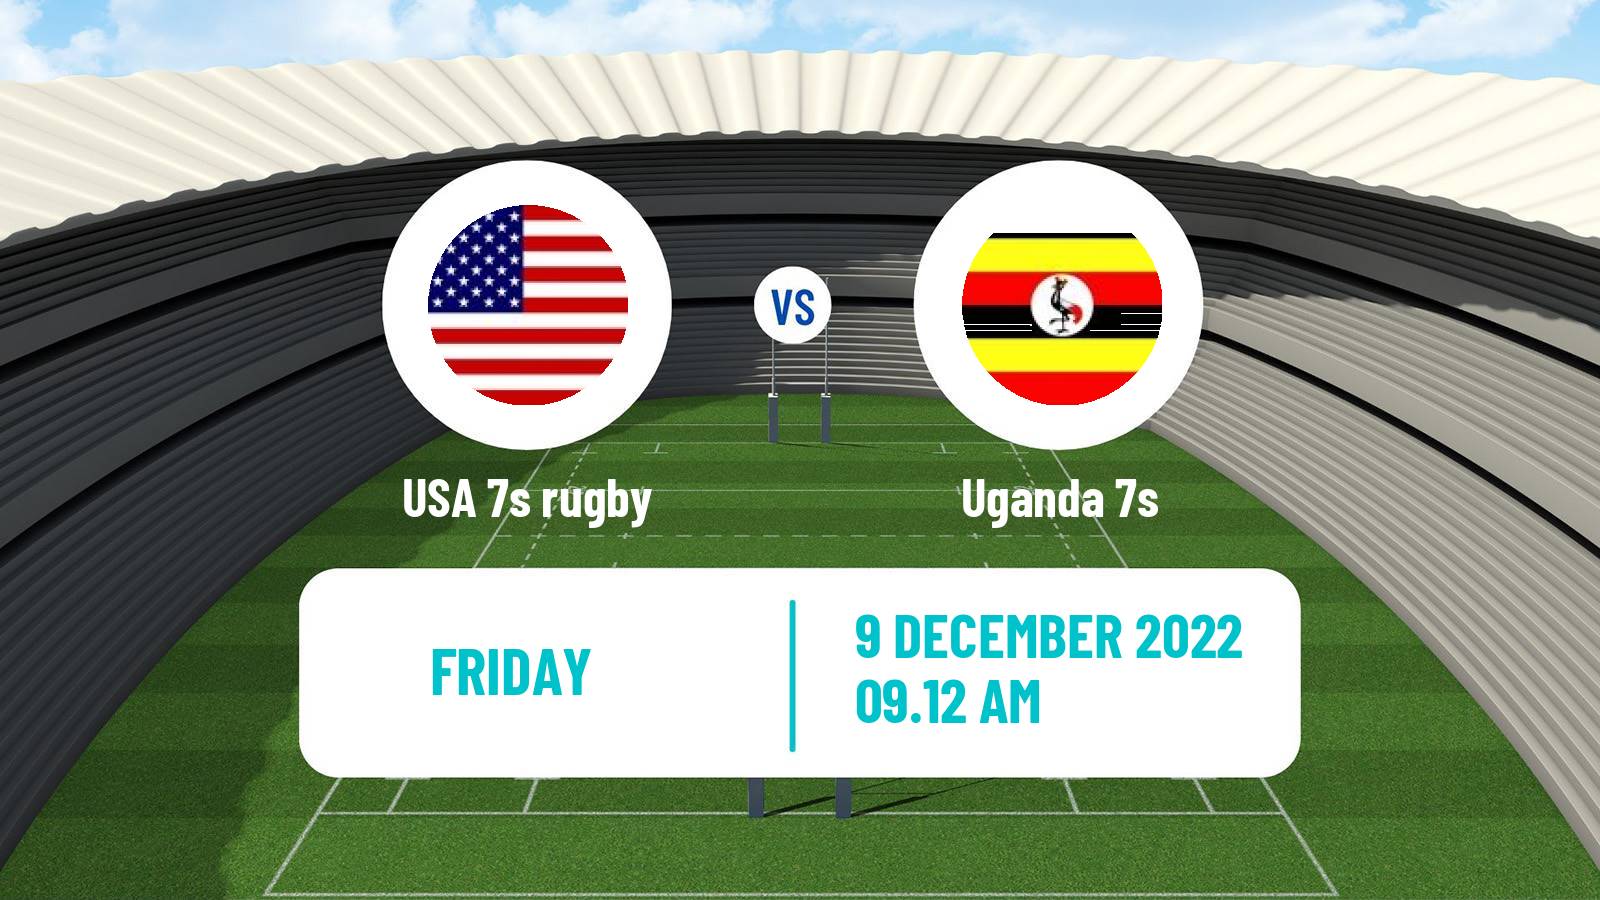 Rugby union Sevens World Series - South Africa USA 7s - Uganda 7s